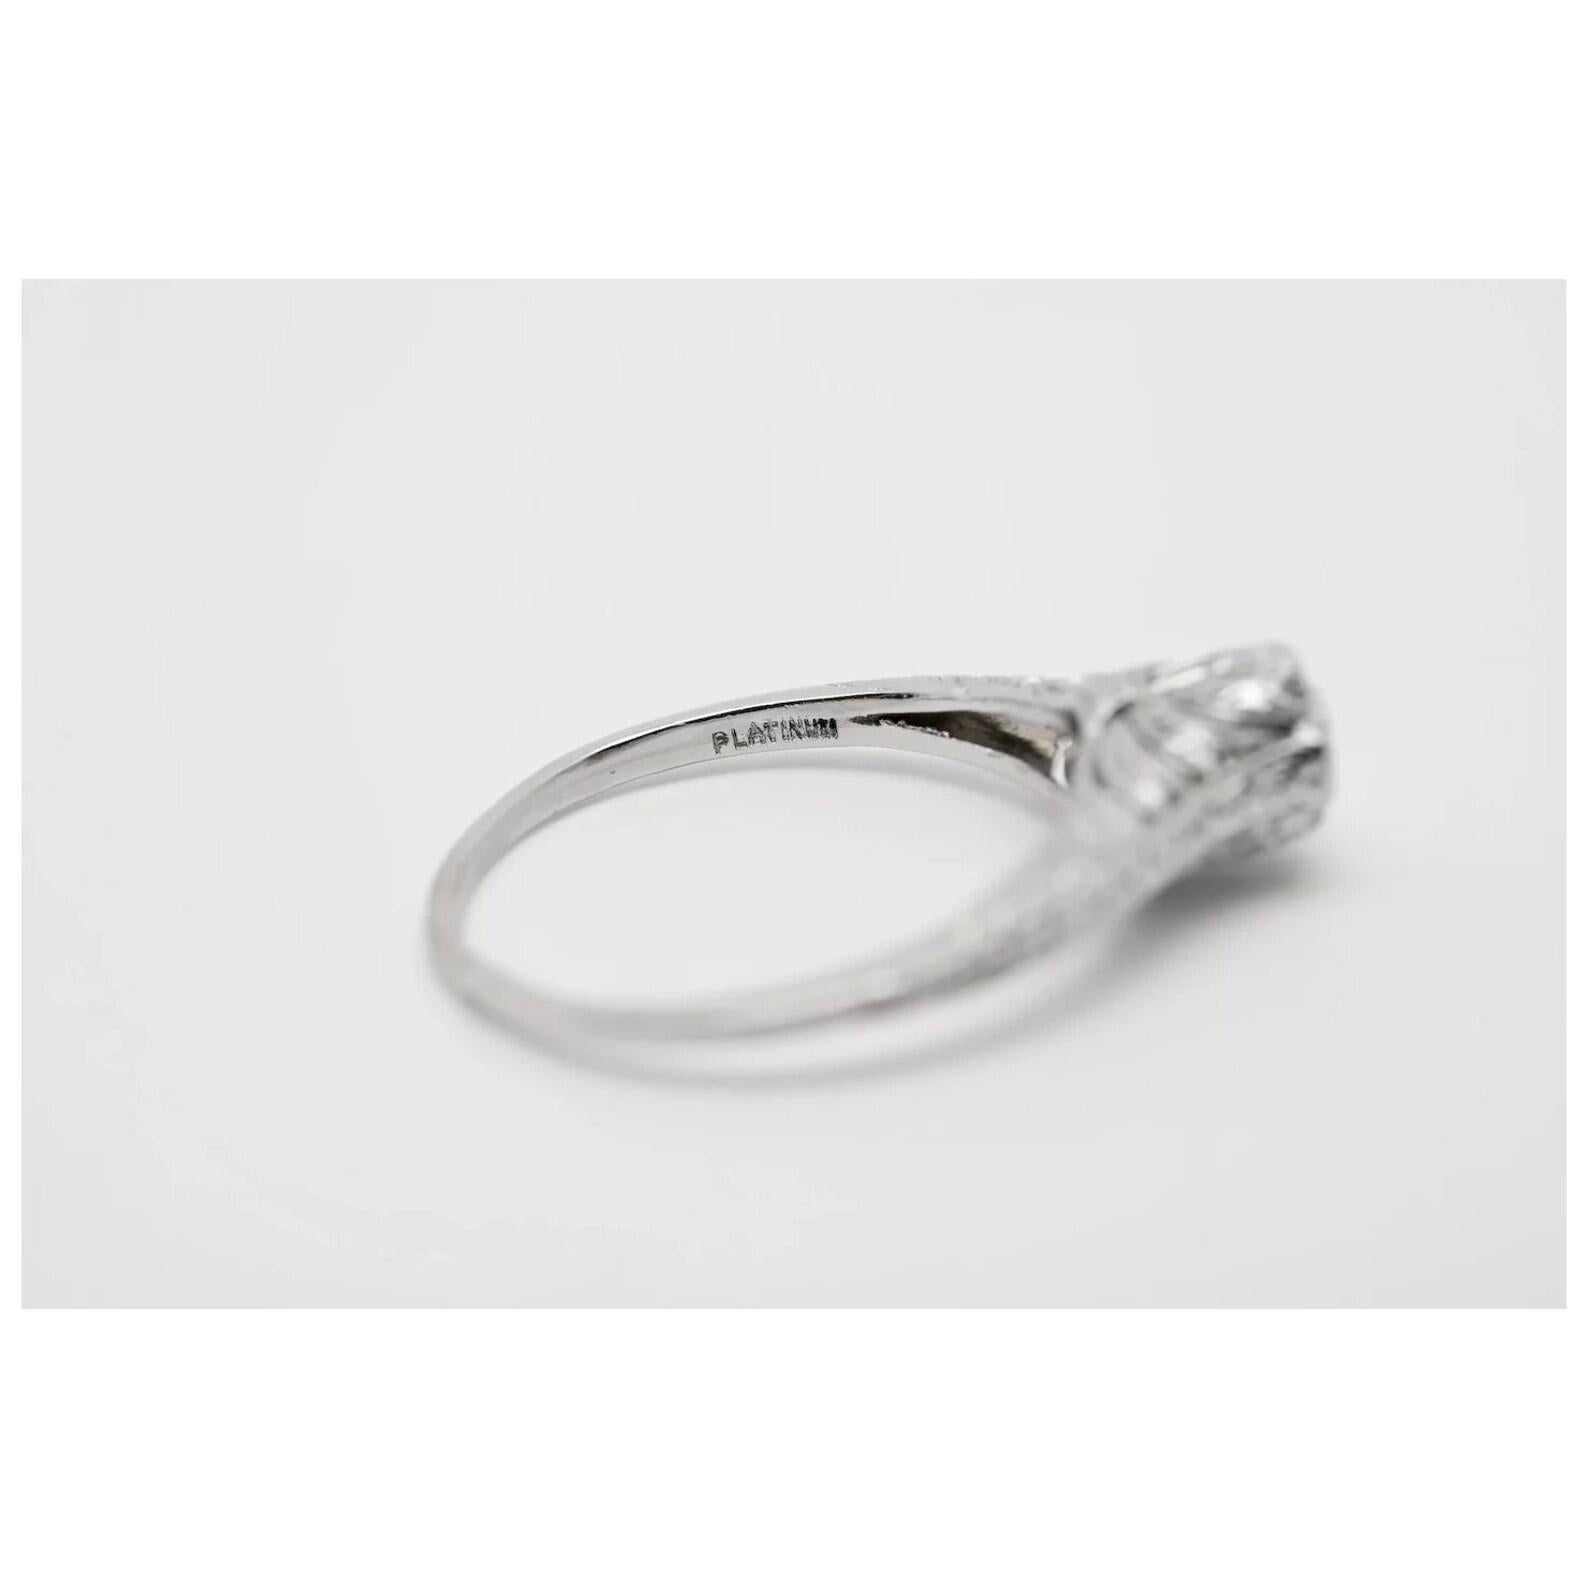 Hand Engraved Art Deco 0.60 Carat Diamond Solitare Engagement Ring in Platinum In Good Condition For Sale In Boston, MA